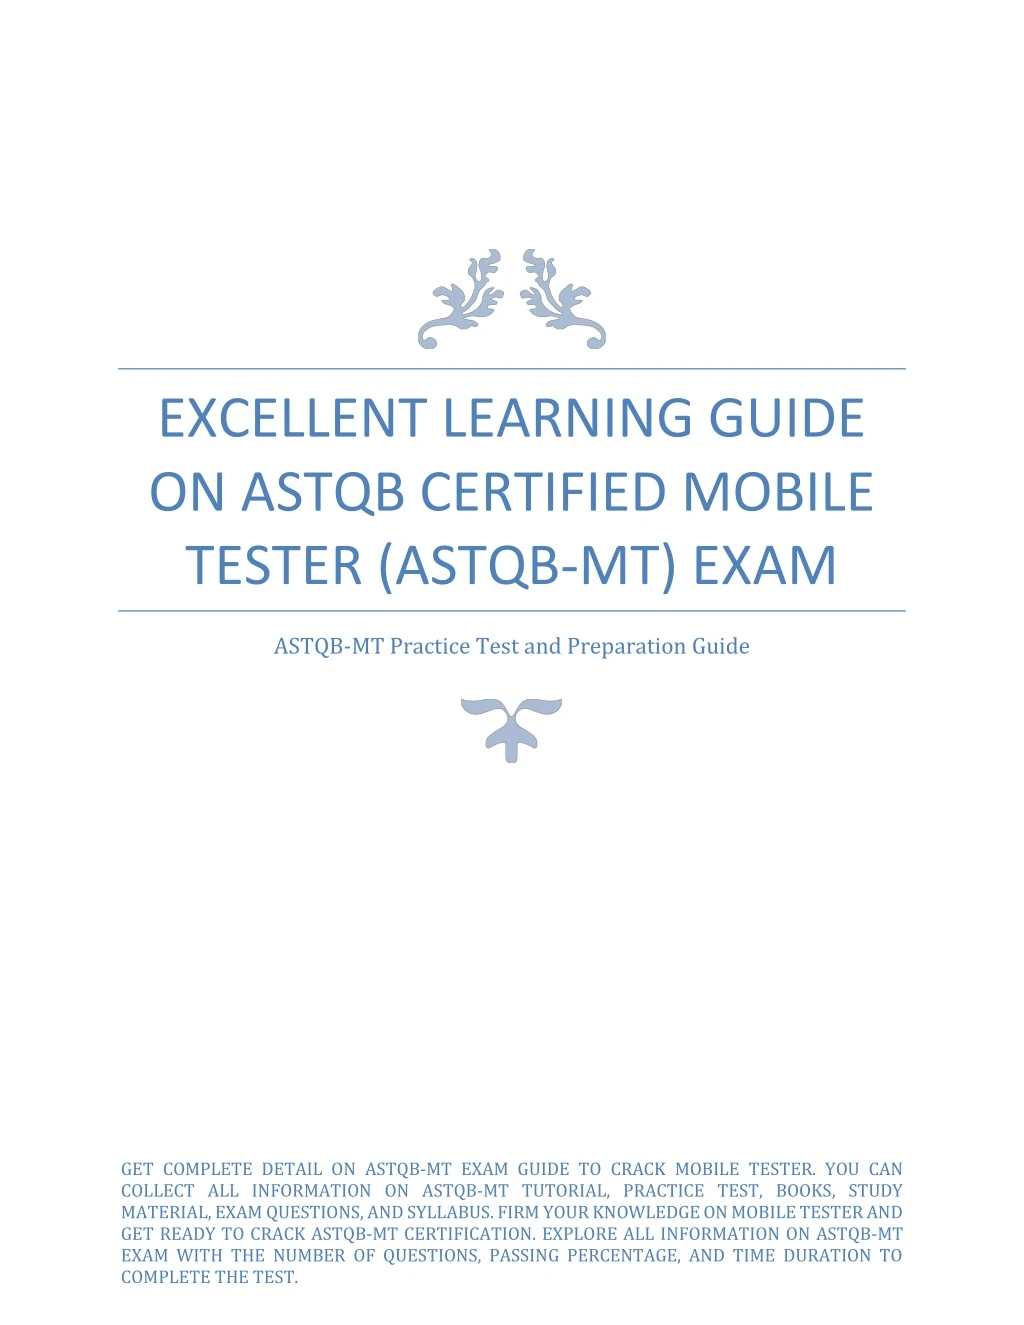 excellent learning guide on astqb certified